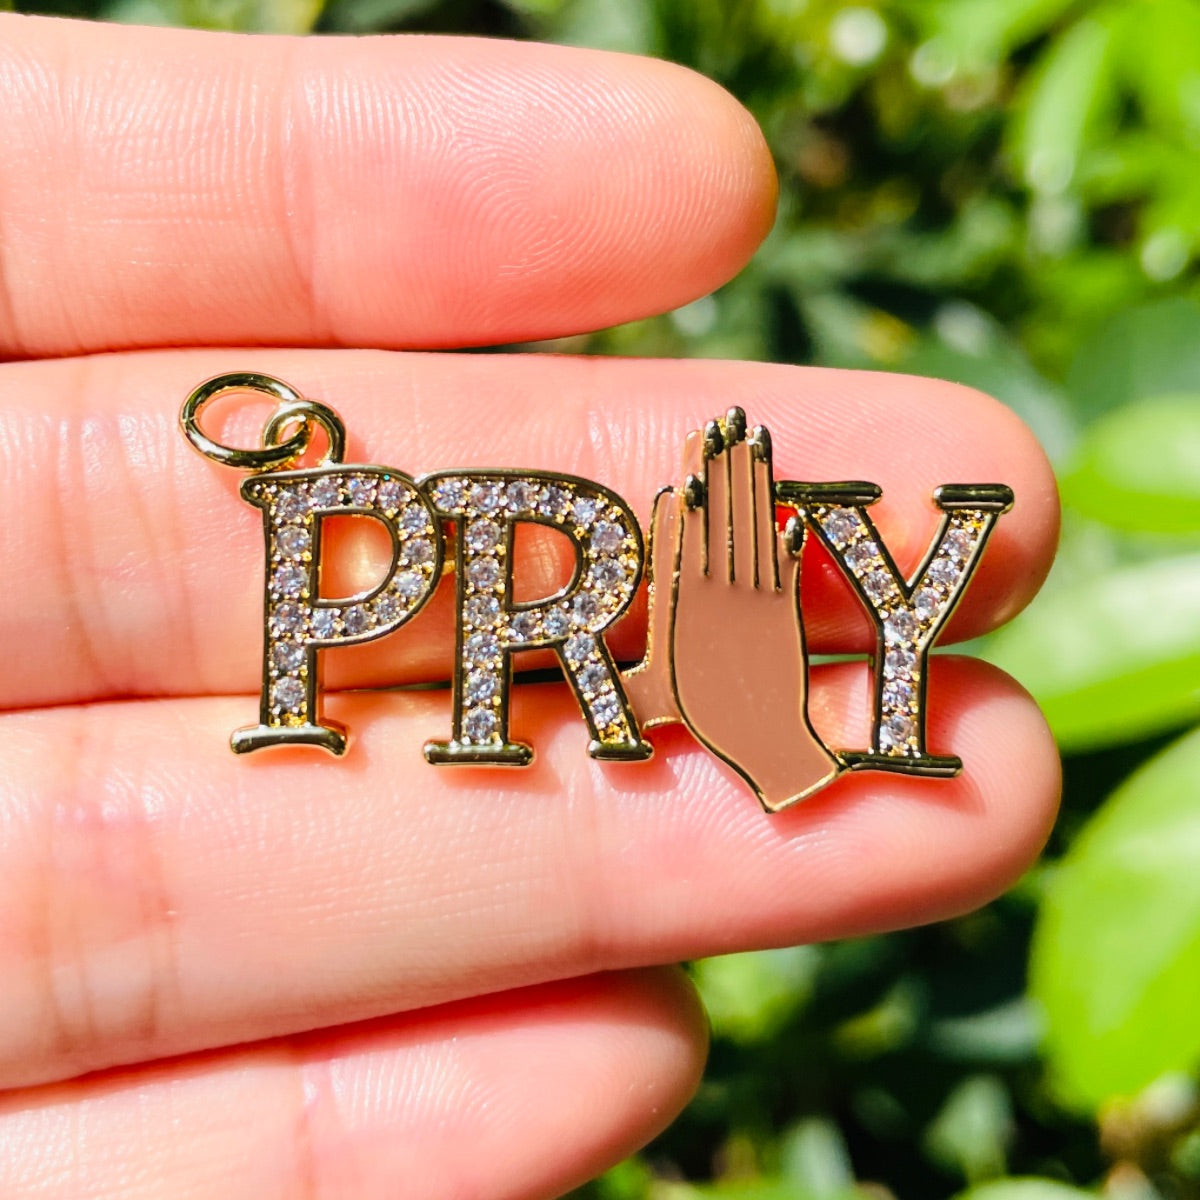 10pcs/lot 35*18mm CZ Pave Praying Hands Pray Word Charms Gold CZ Paved Charms Christian Quotes New Charms Arrivals Words & Quotes Charms Beads Beyond